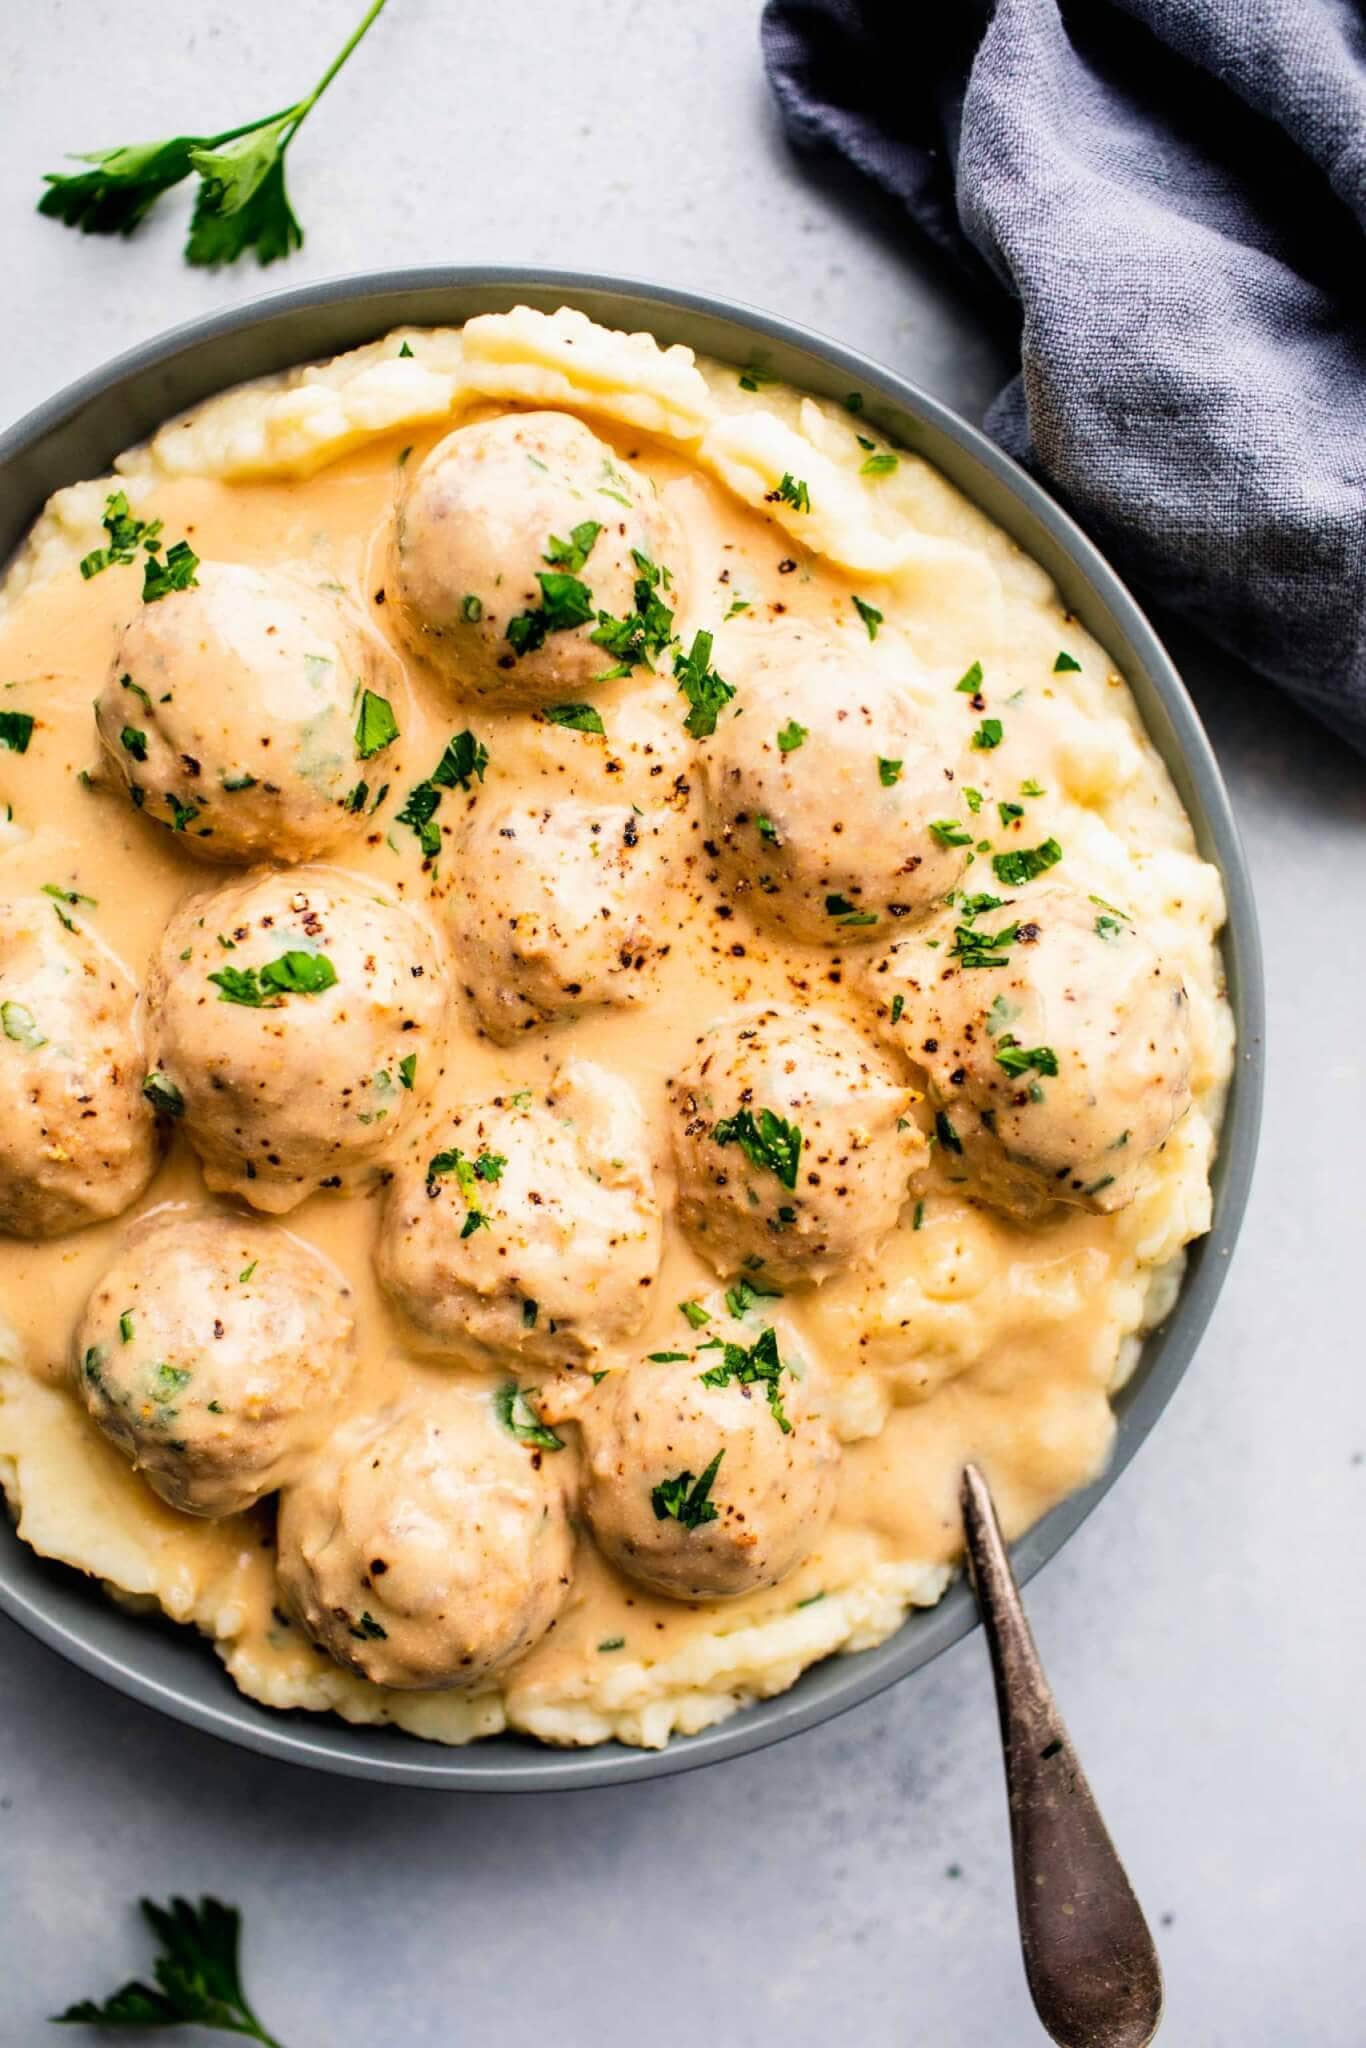 Overhead shot of bowl of turkey swedish meatballs served on top of mashed potatoes.